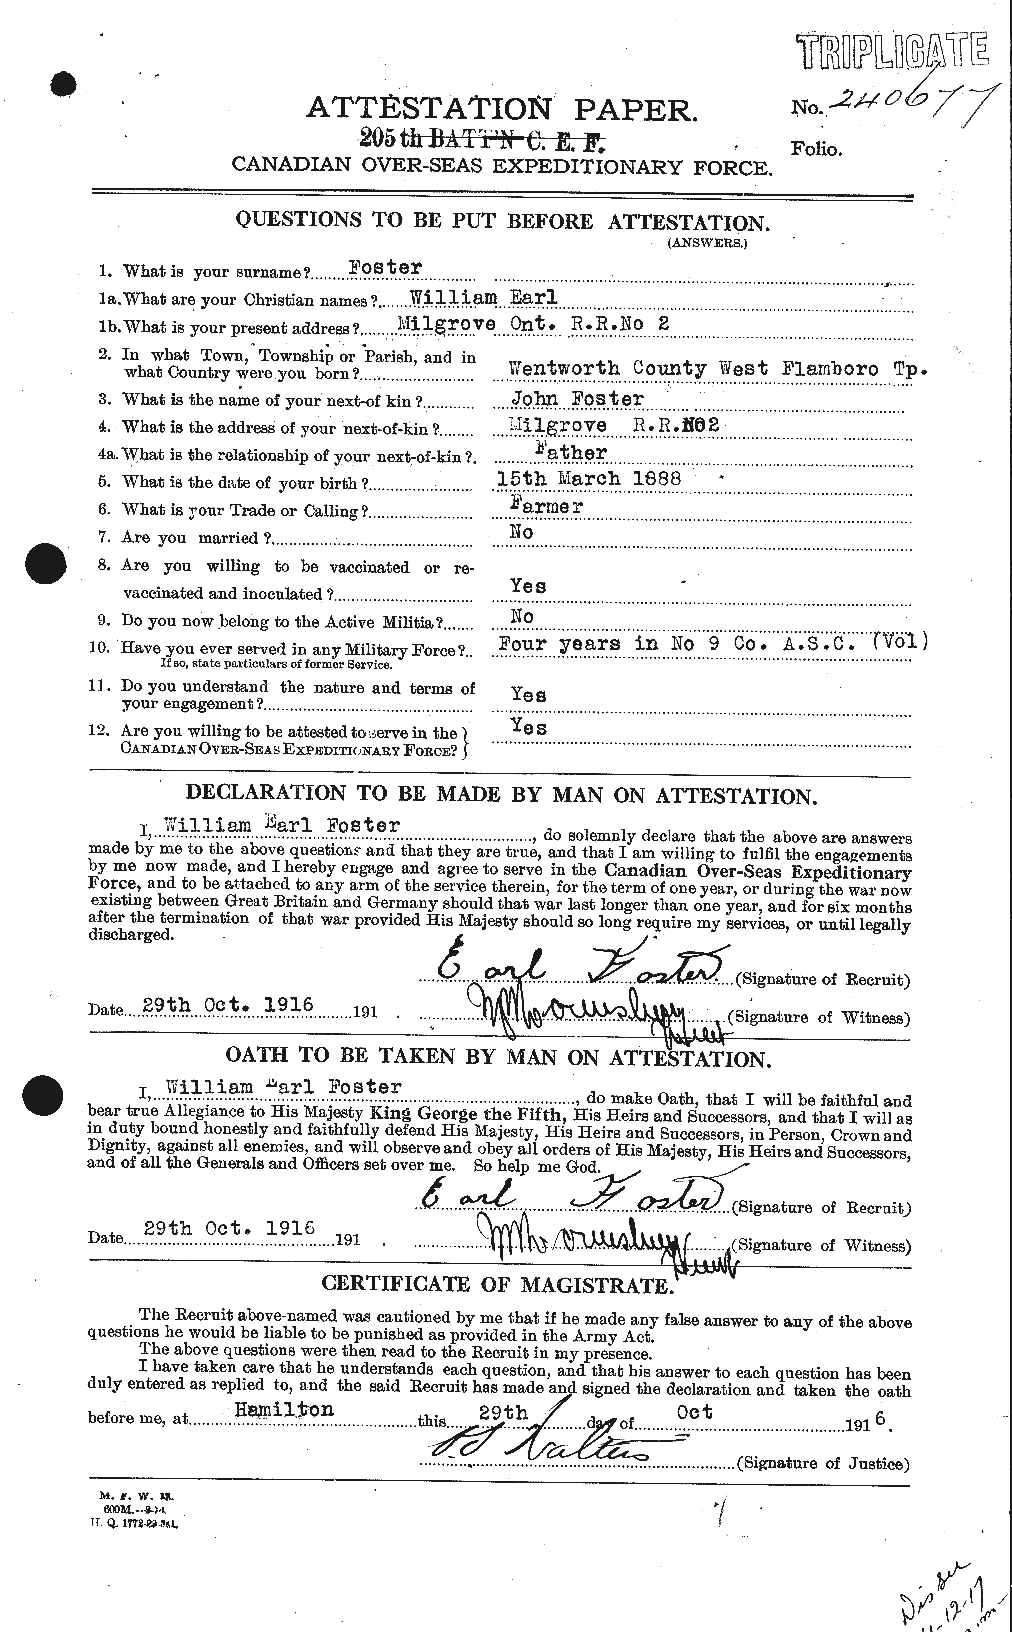 Personnel Records of the First World War - CEF 328736a